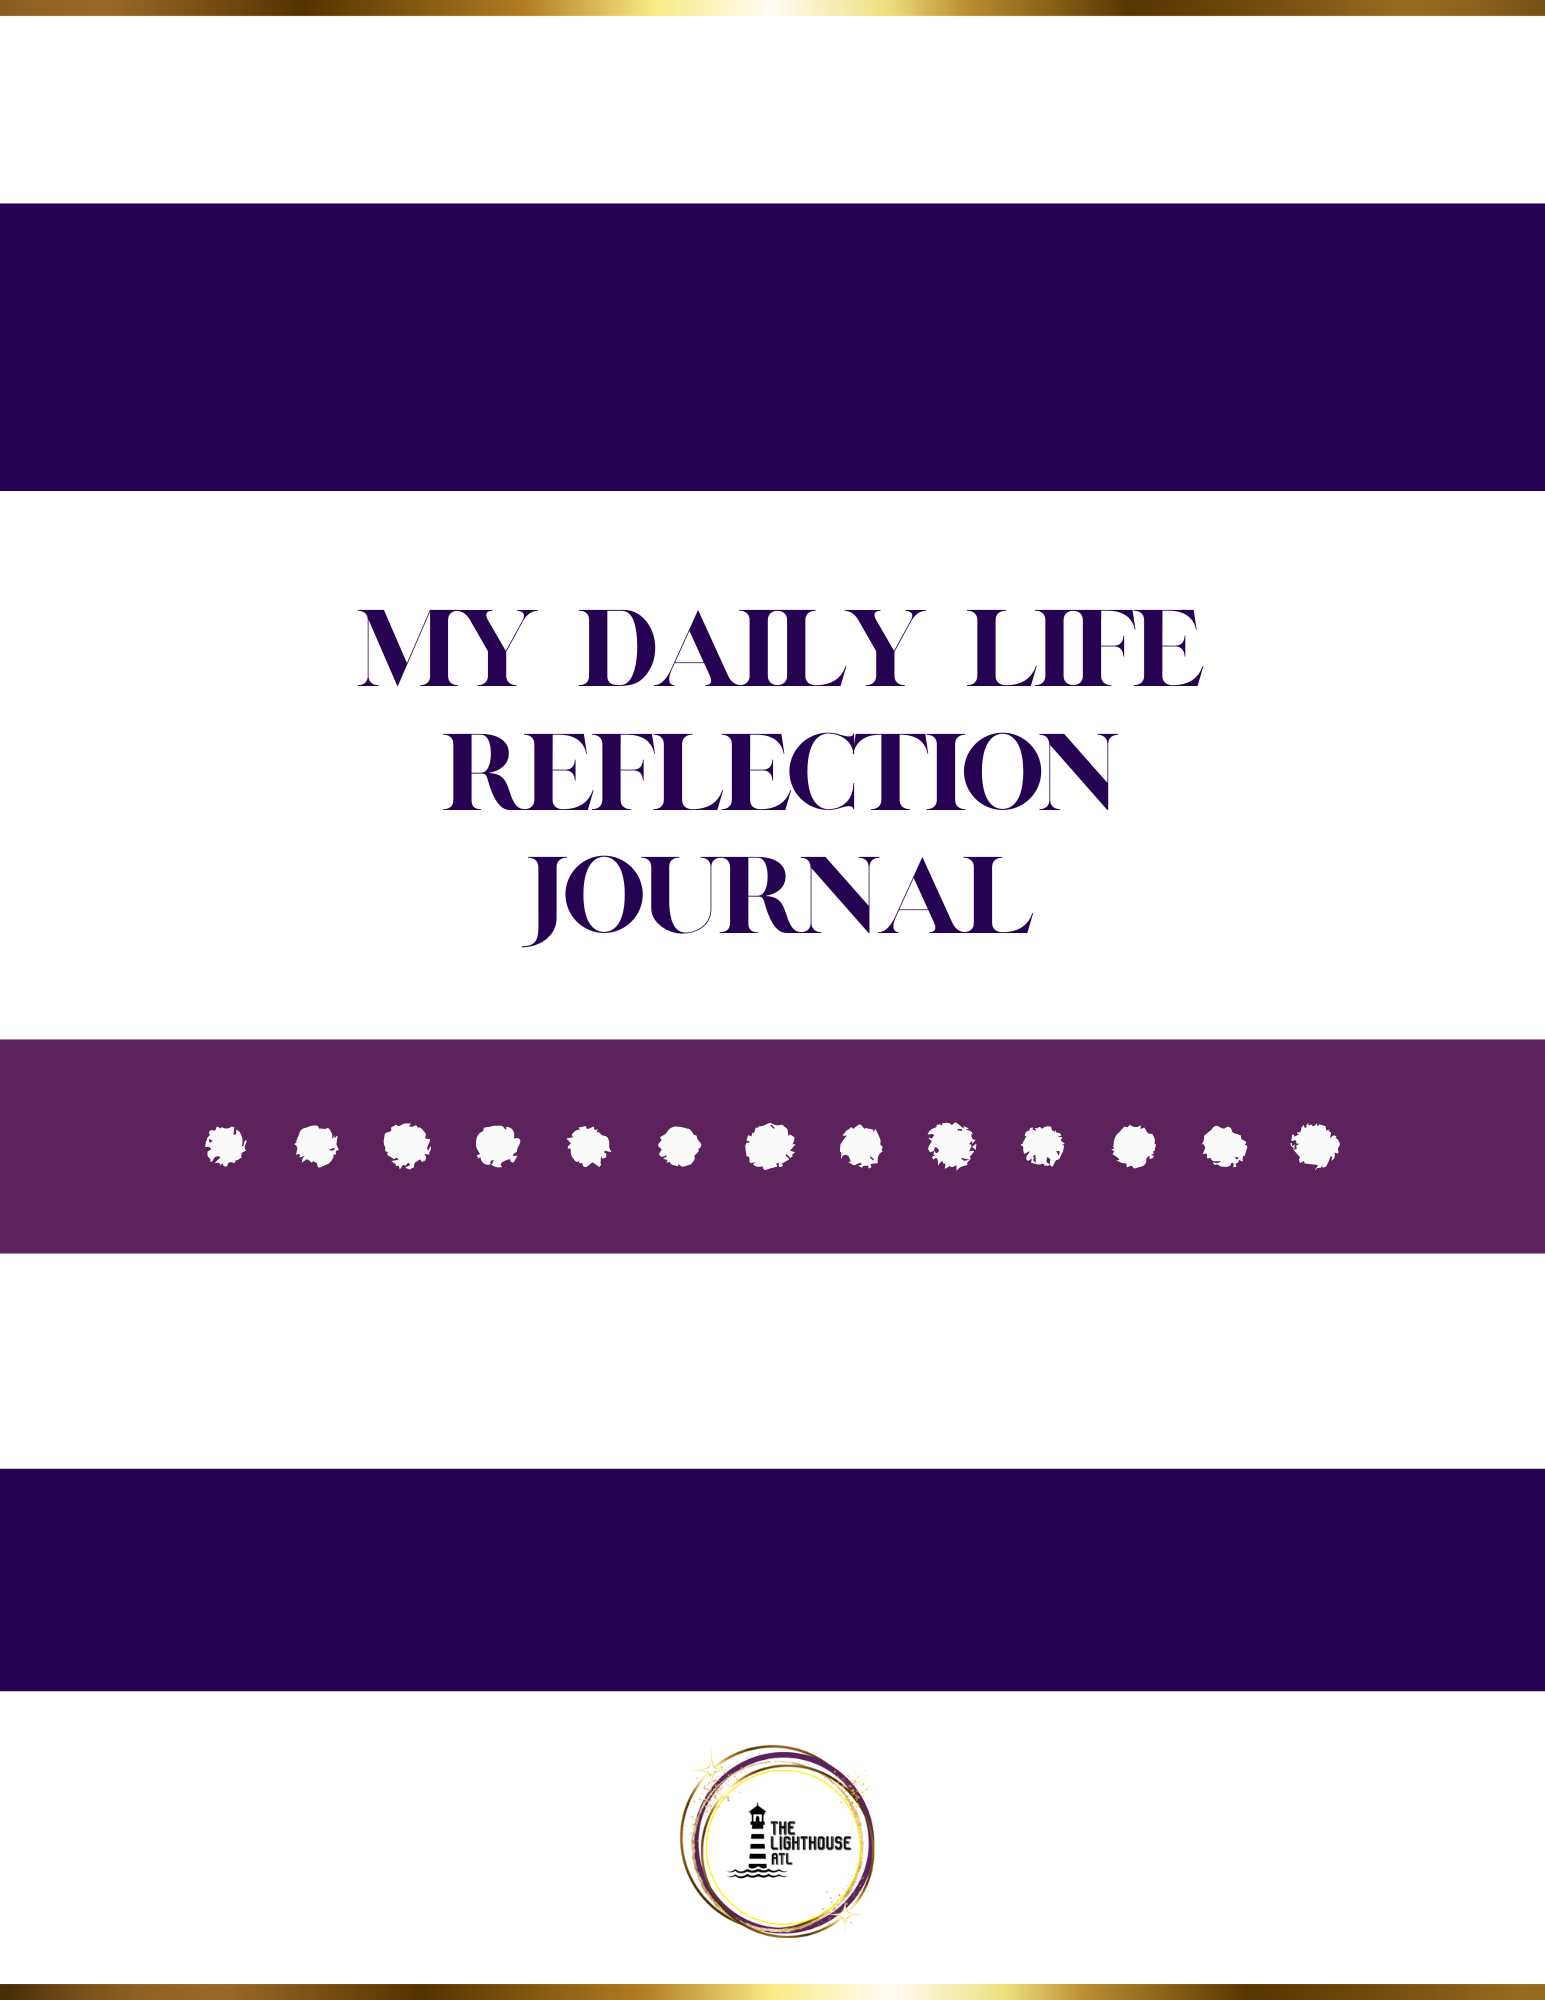 JOURNAL YOUR LIFE EXPERIENCES